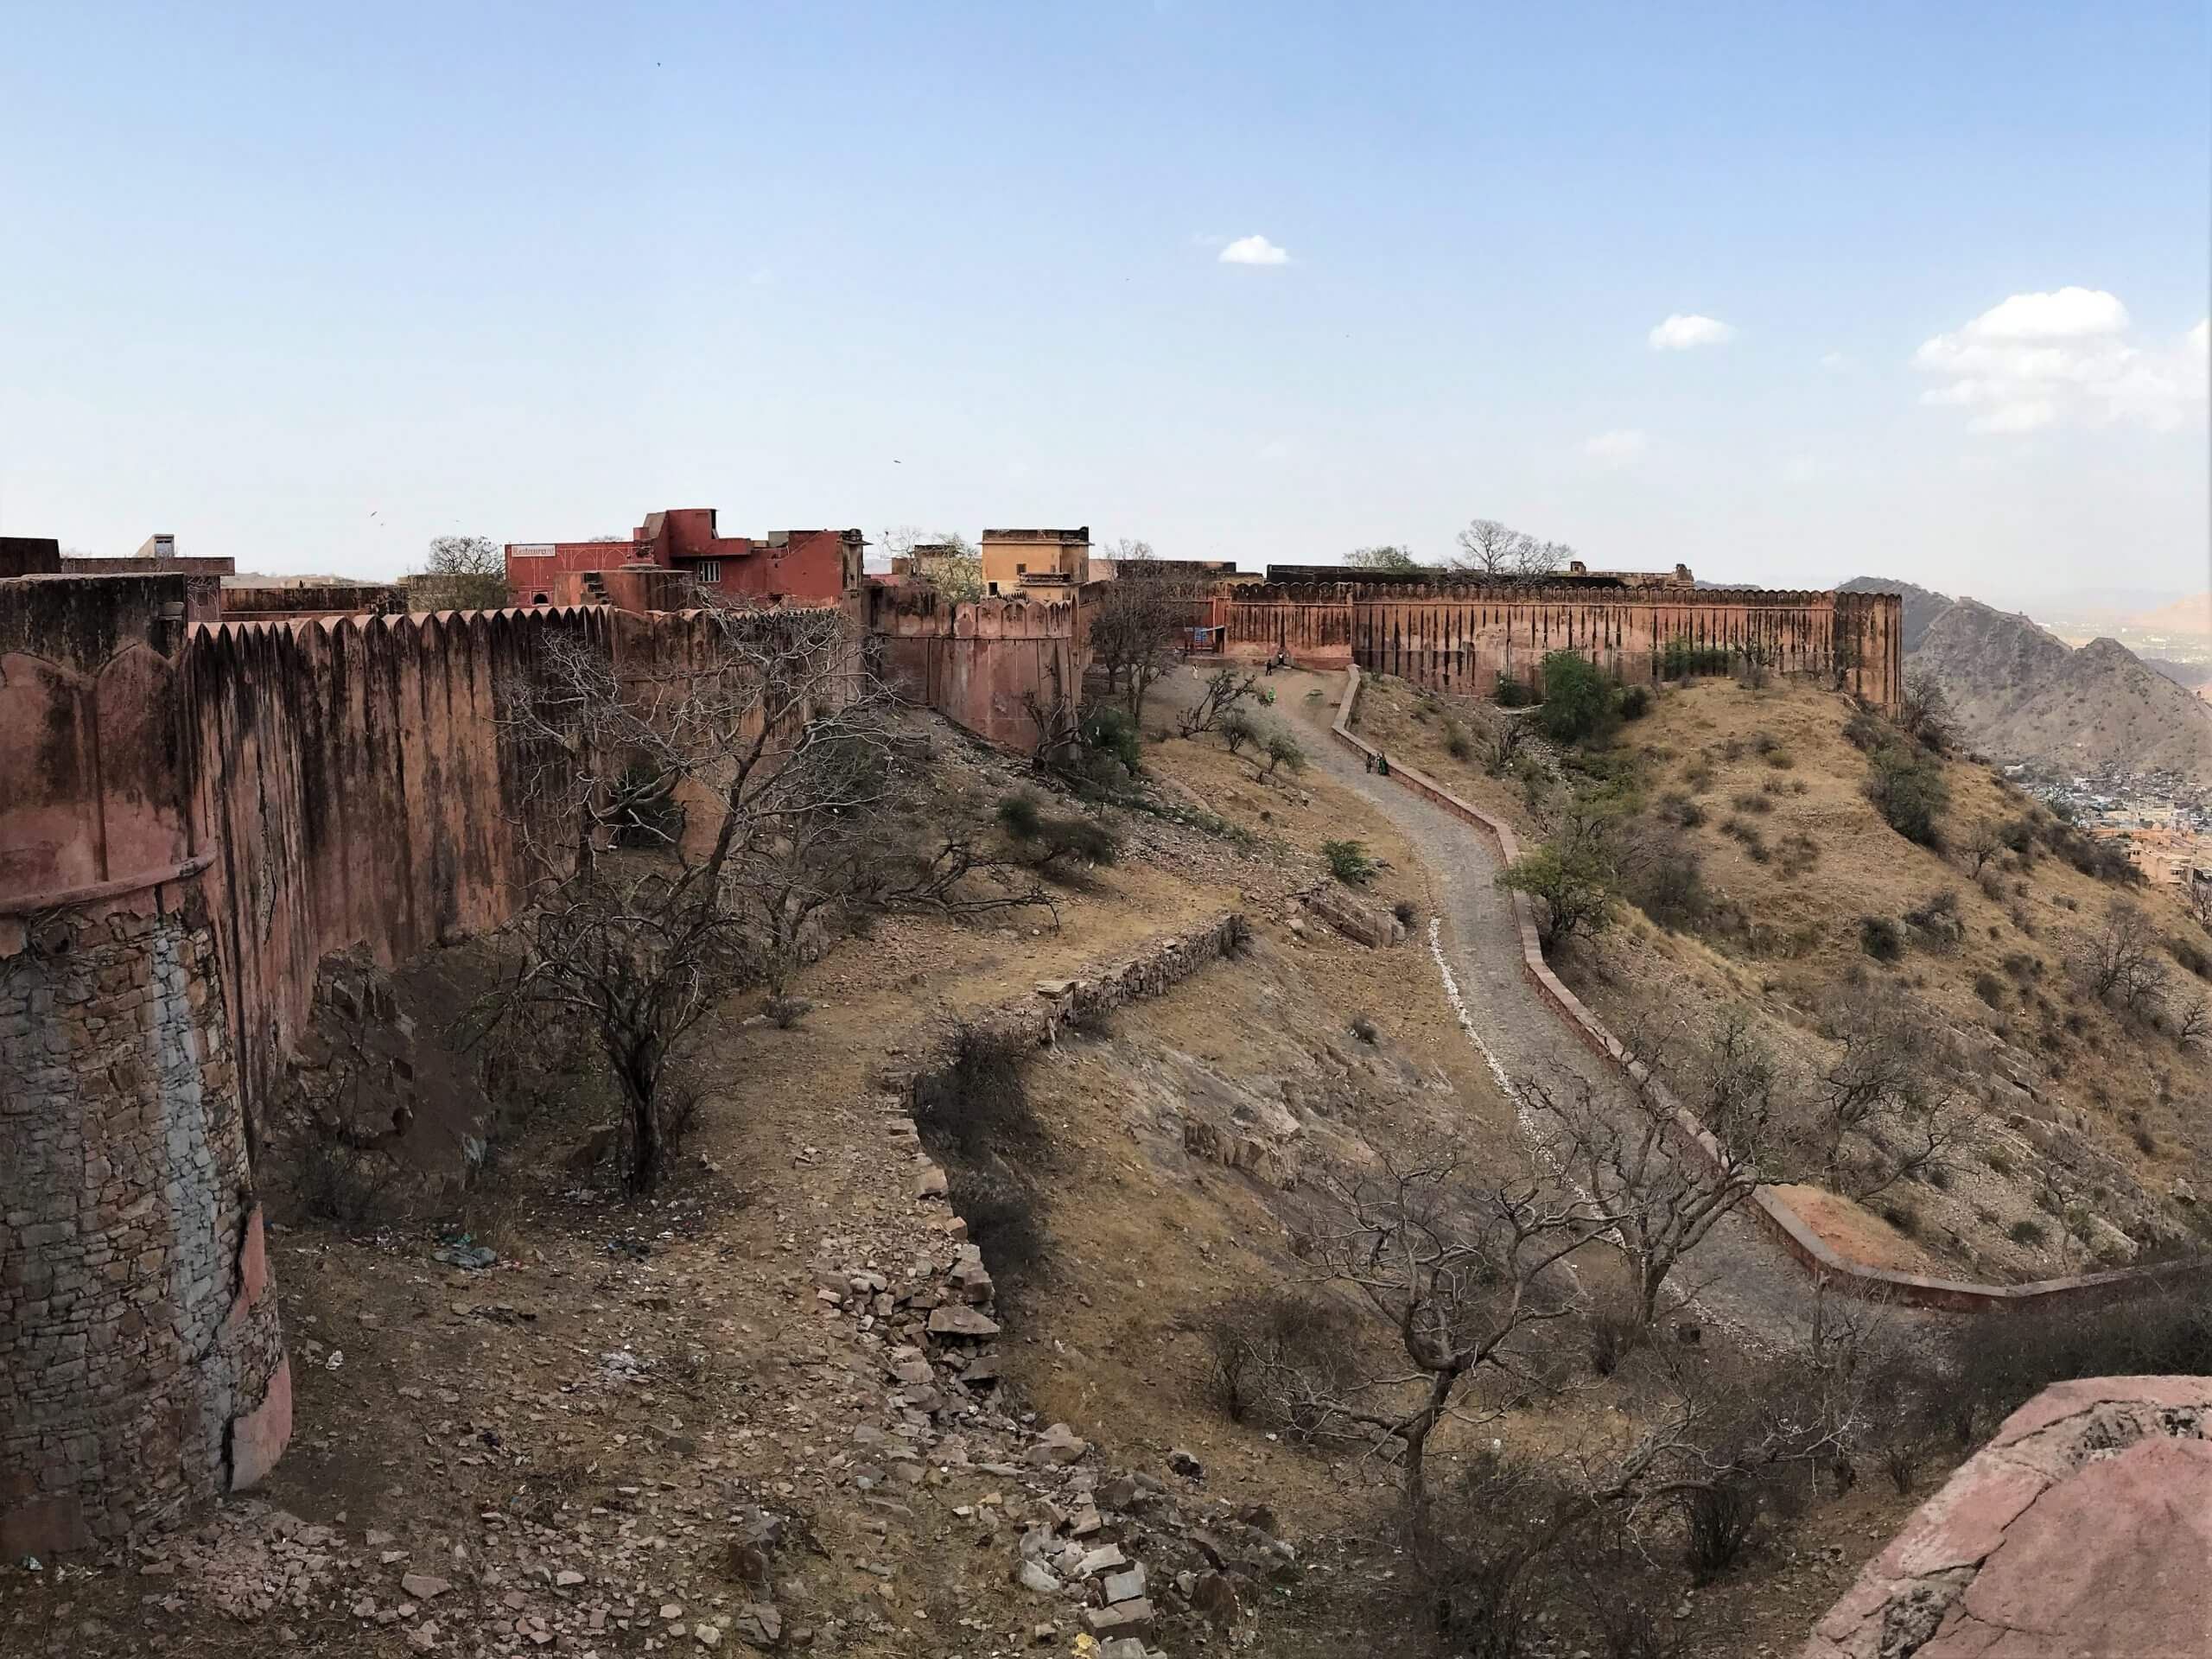 View from Jaigarh Fort